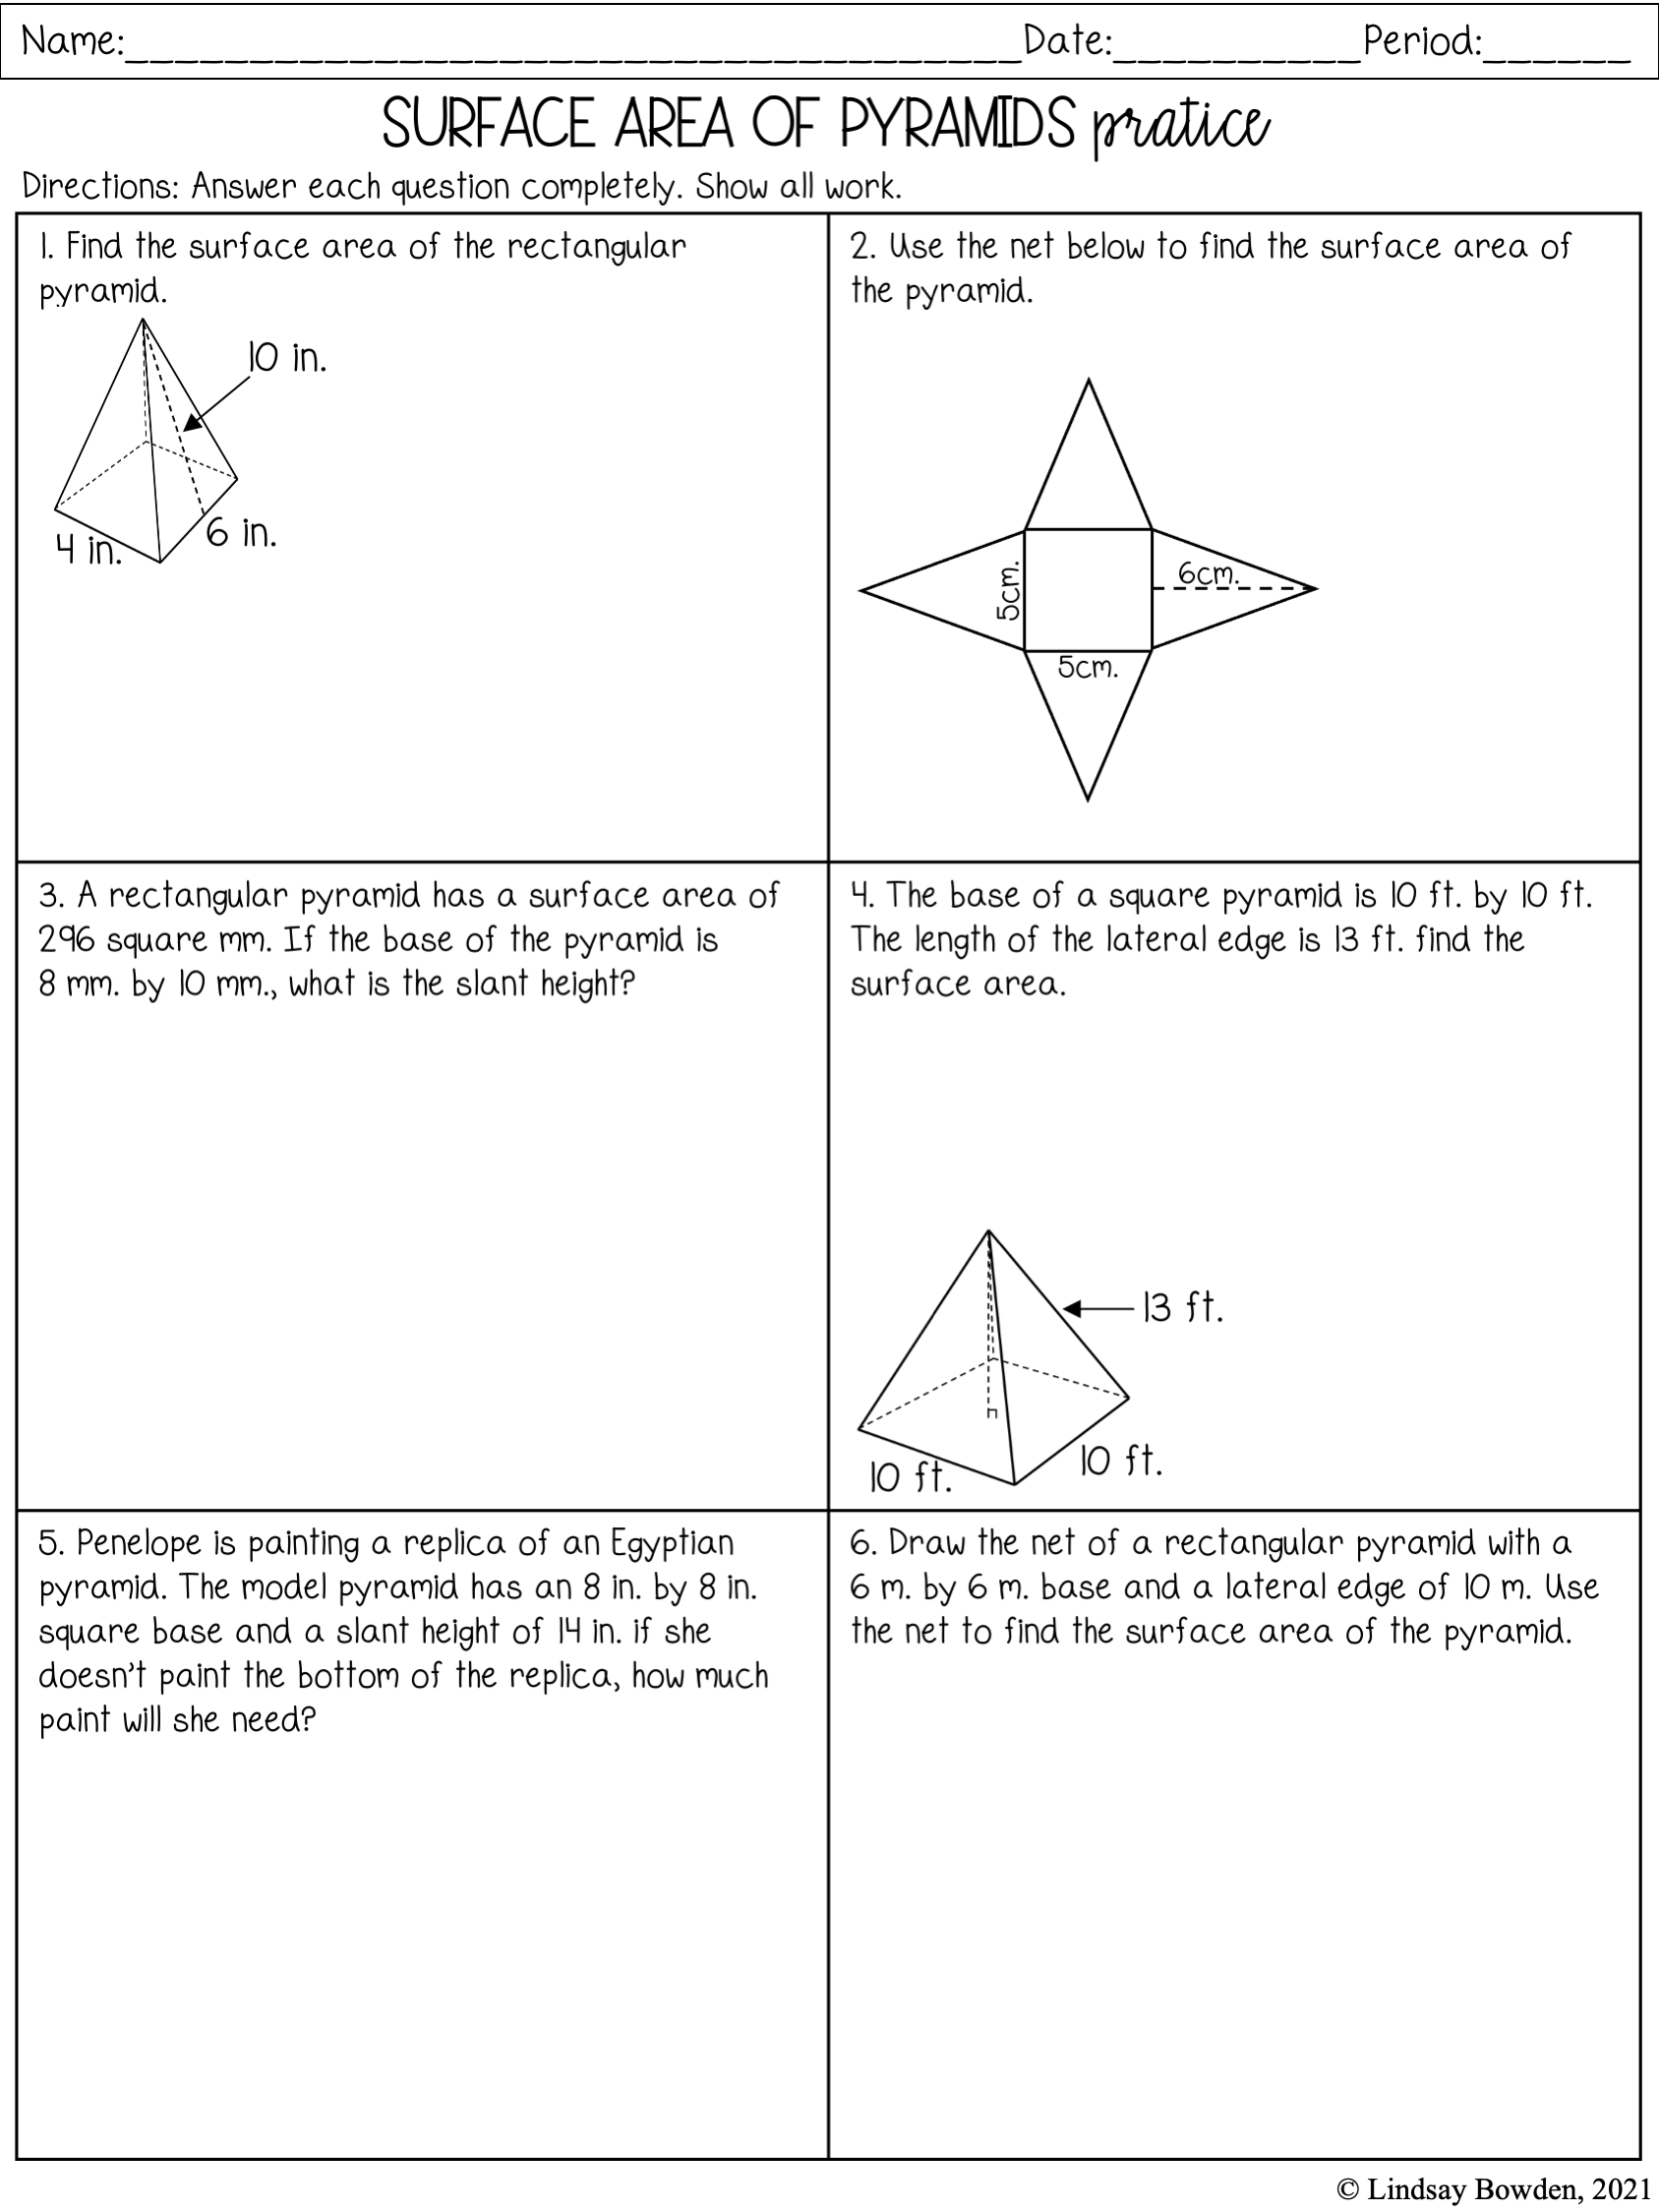 surface-area-notes-worksheets-lindsay-bowden